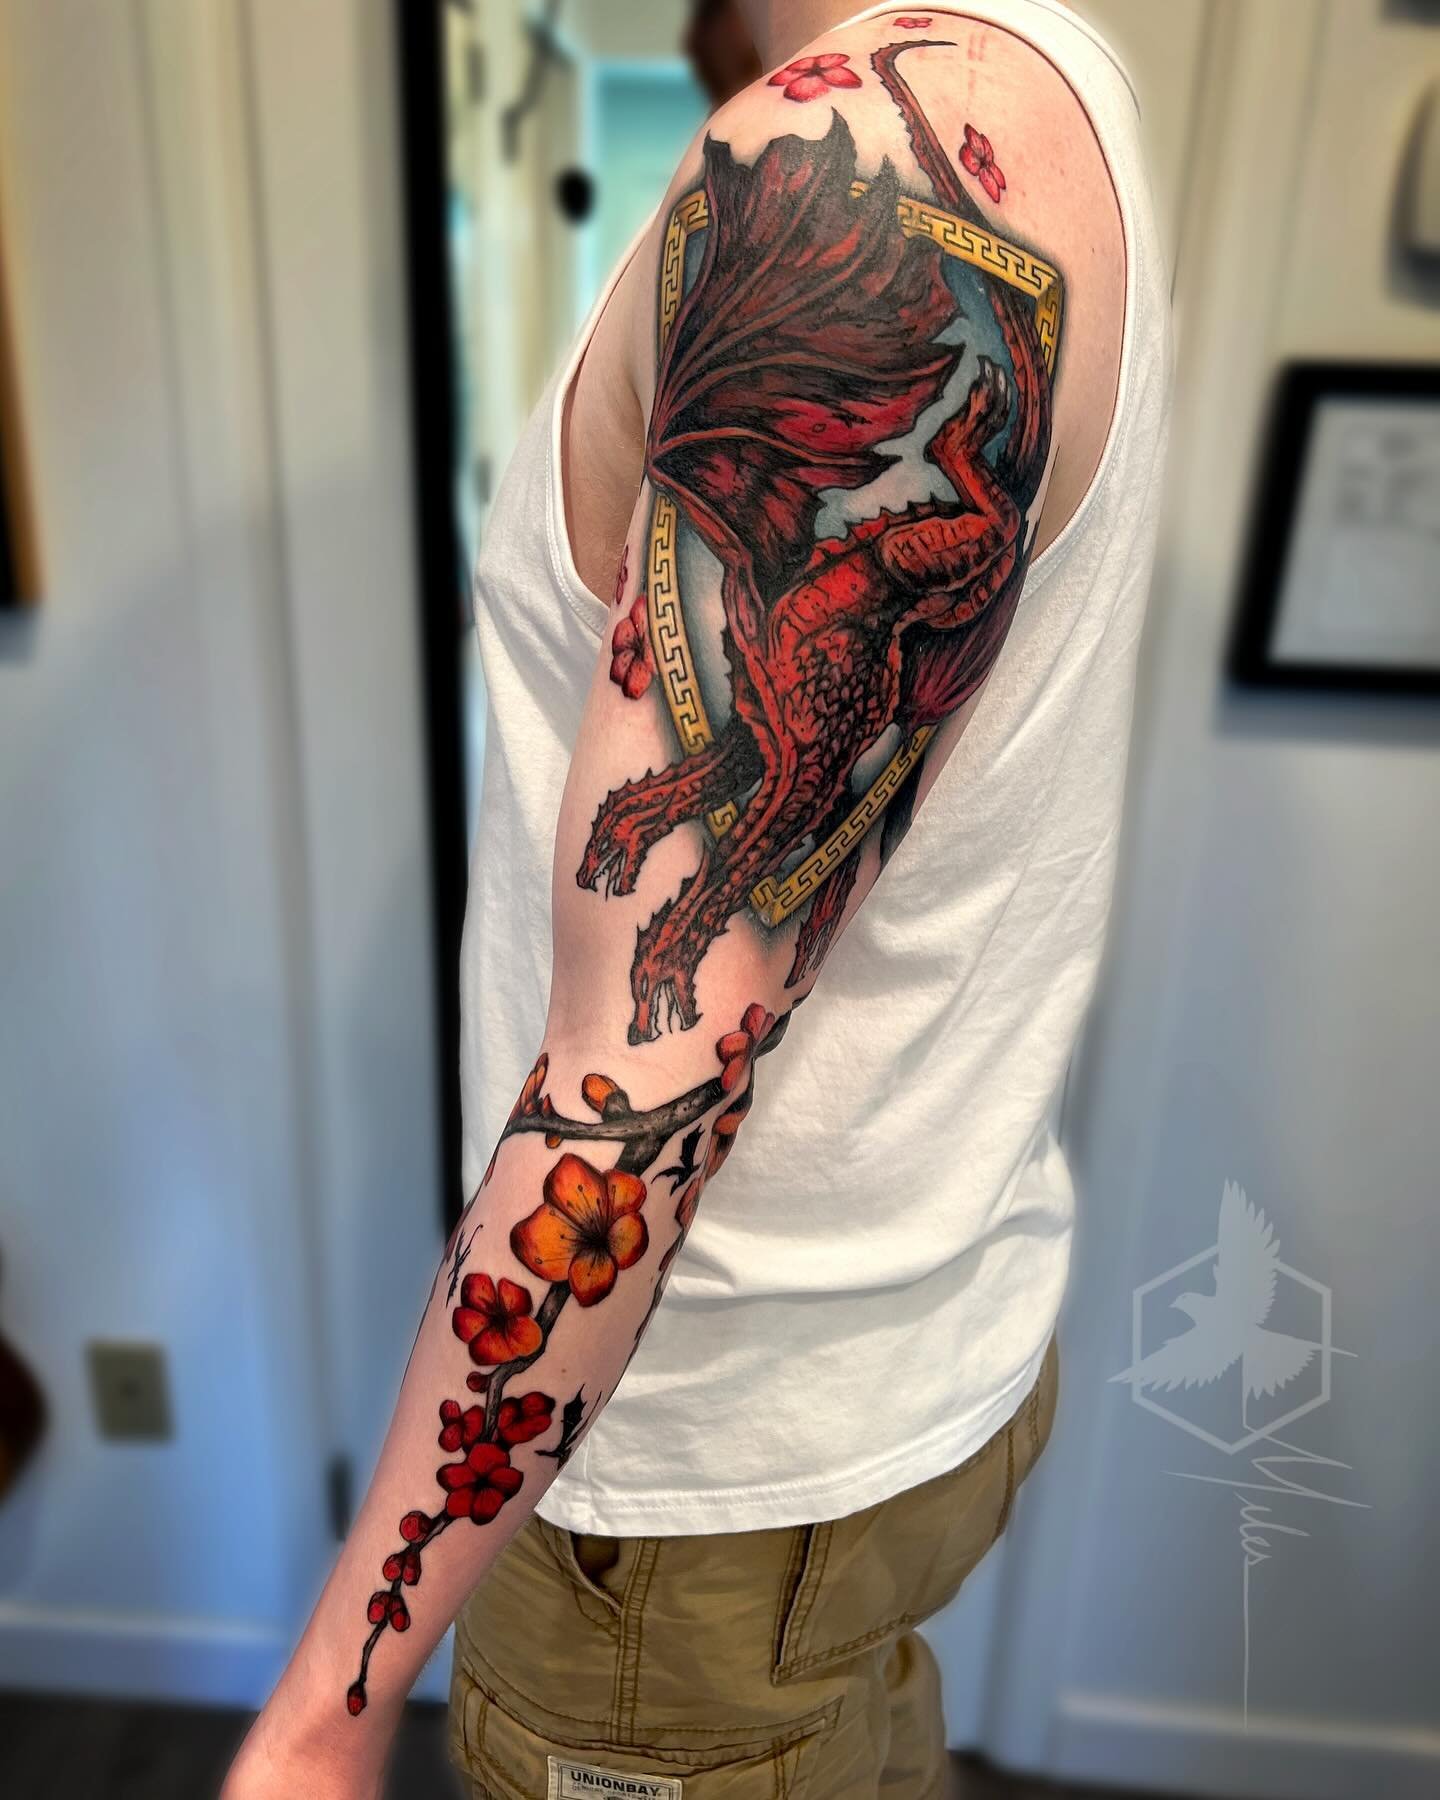 Continued working on this sleeve by adding a plum blossom branch flowing under the dragon sigil. Thank you Chris!